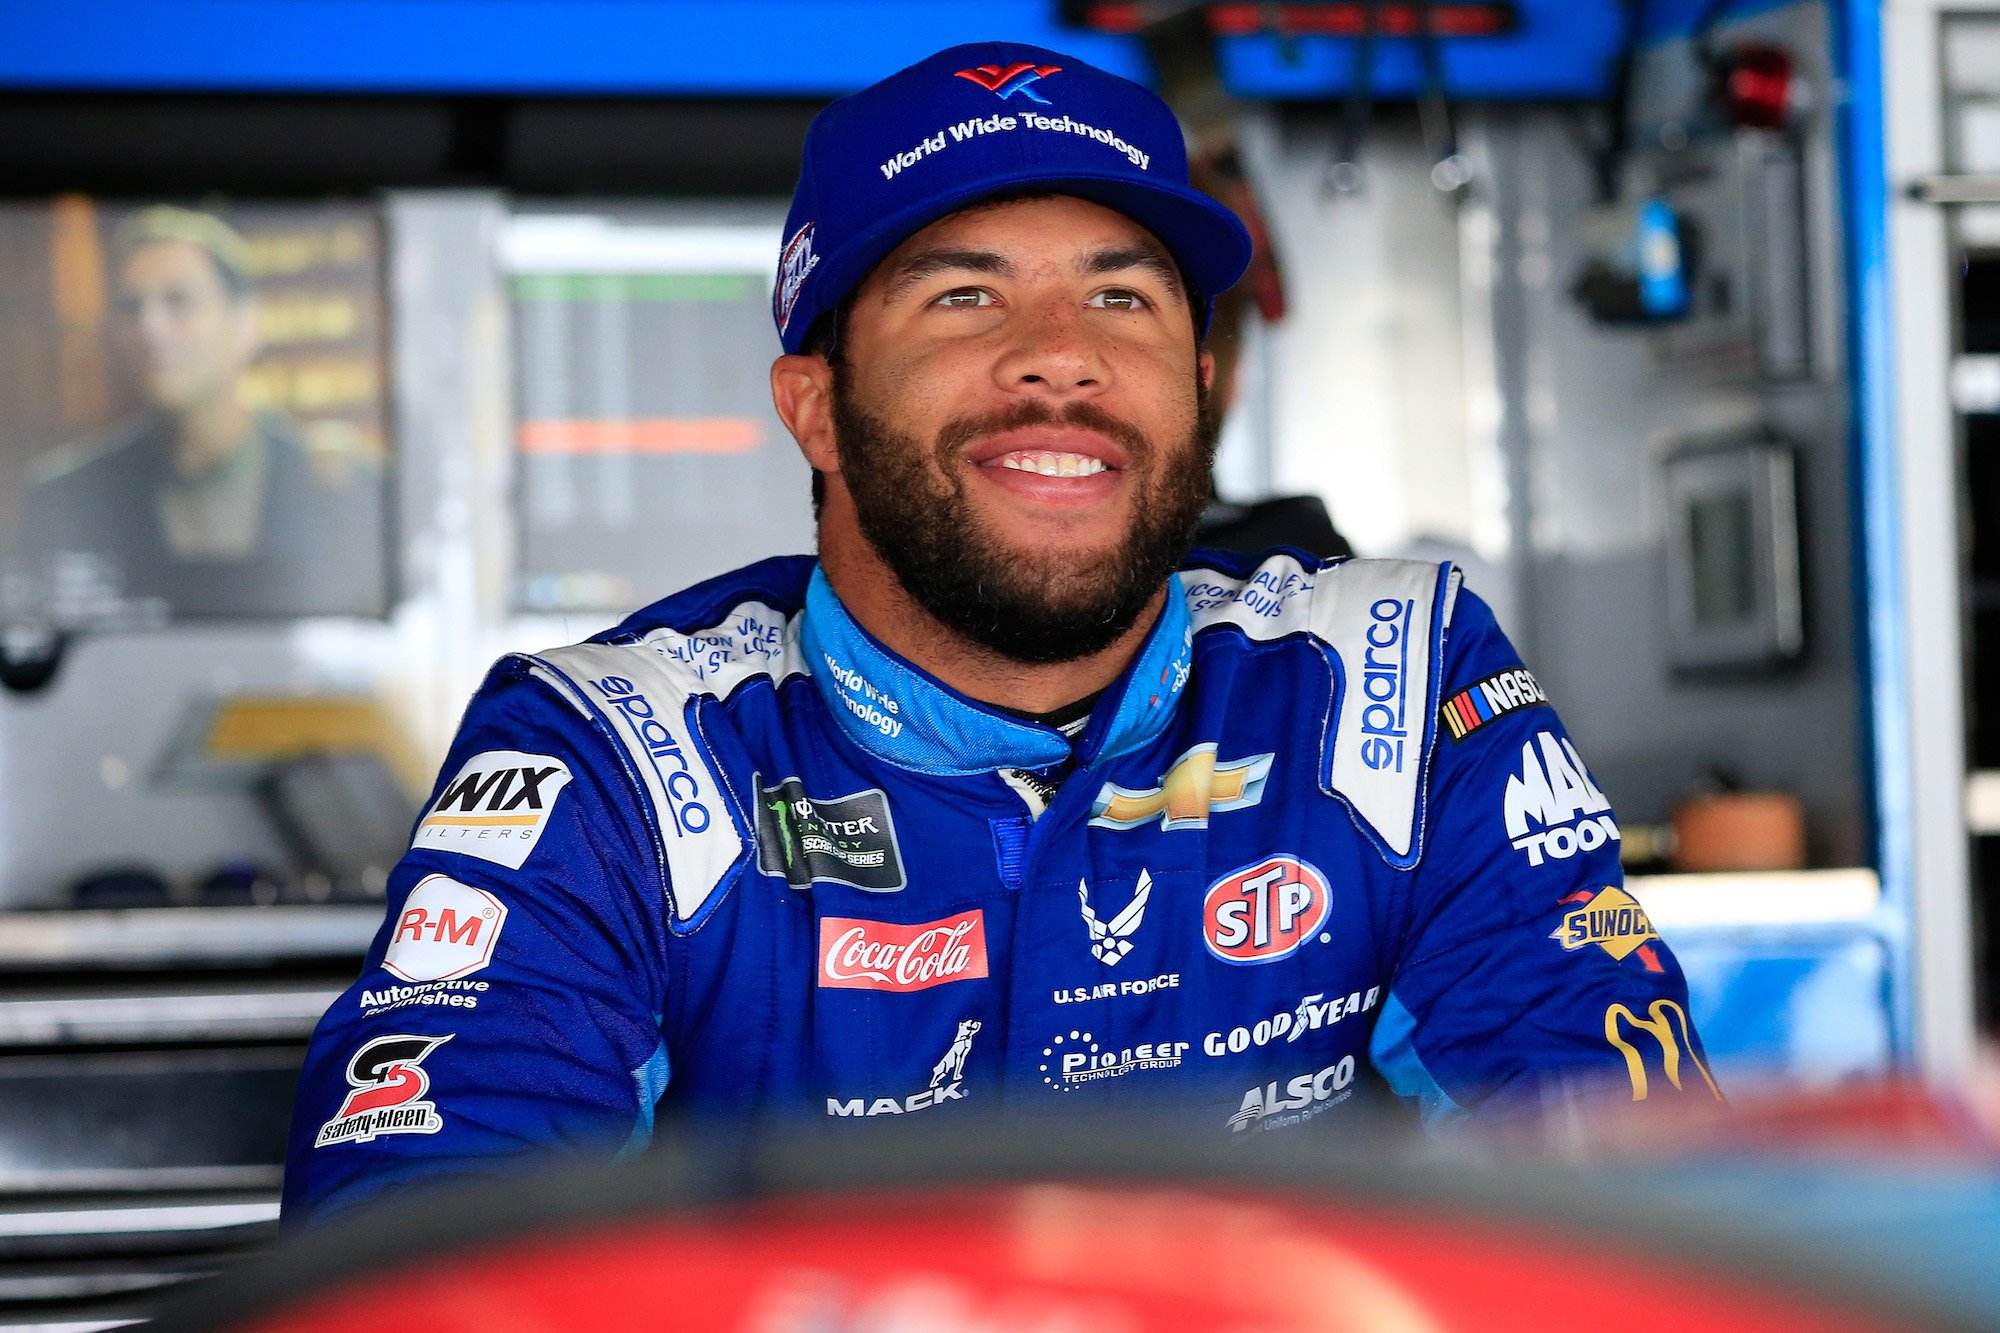 Bubba Wallace smiling in a racing jacket and blue hat, looking away from the camera